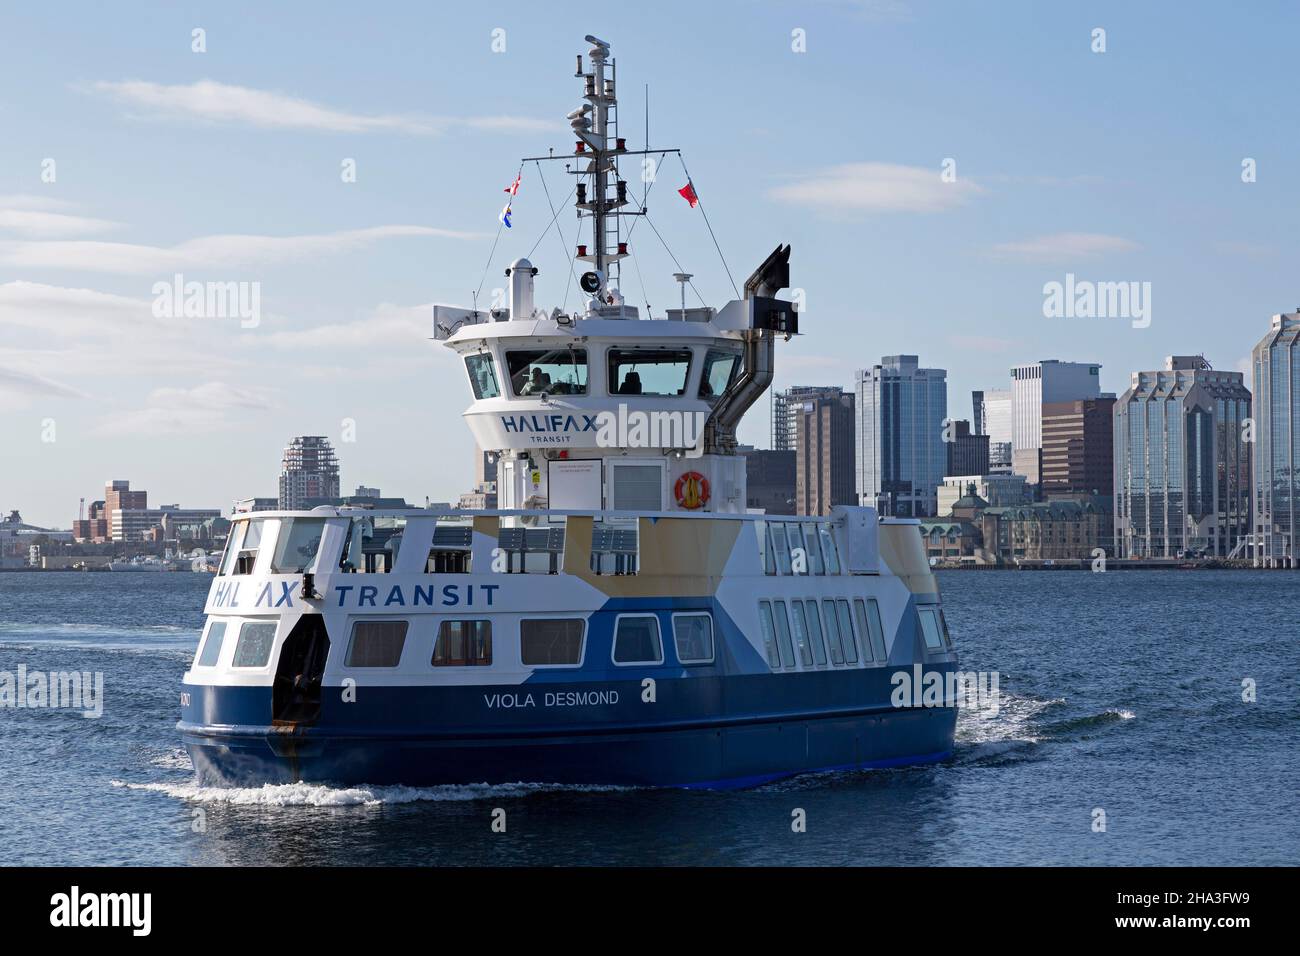 The Halifax-Dartmouth Ferry crosses Halifax Harbour in Nova Scotia, Canada. The transport system is the oldest saltwater ferry service in Norrth Ameri Stock Photo